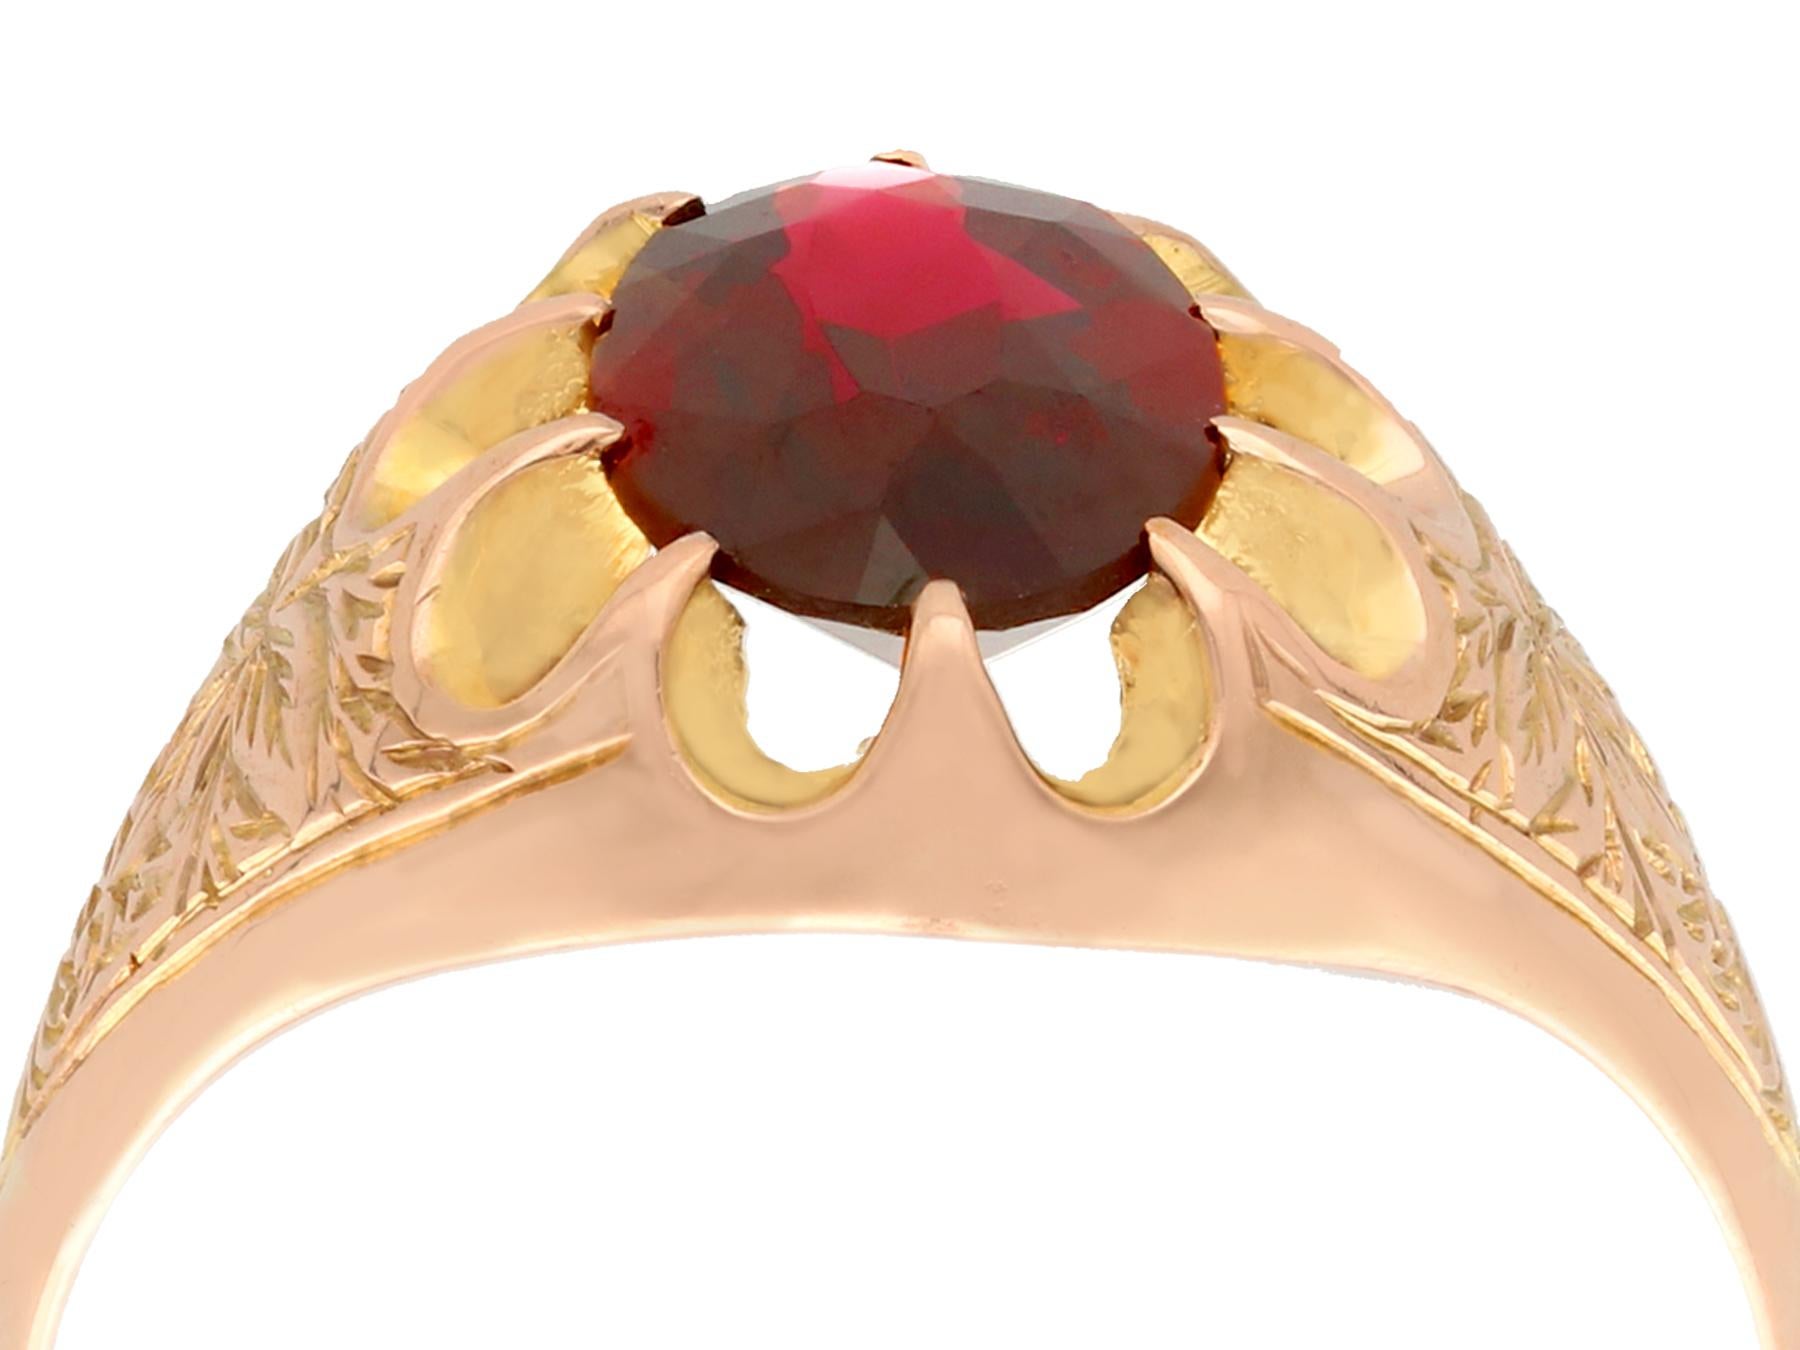 An impressive antique 2.57 carat garnet and 9 karat rose gold dress ring; part of our diverse antique jewelry and estate jewelry collections.

This fine and impressive antique ring has been crafted in 9k rose gold.

The multi claw setting displays a